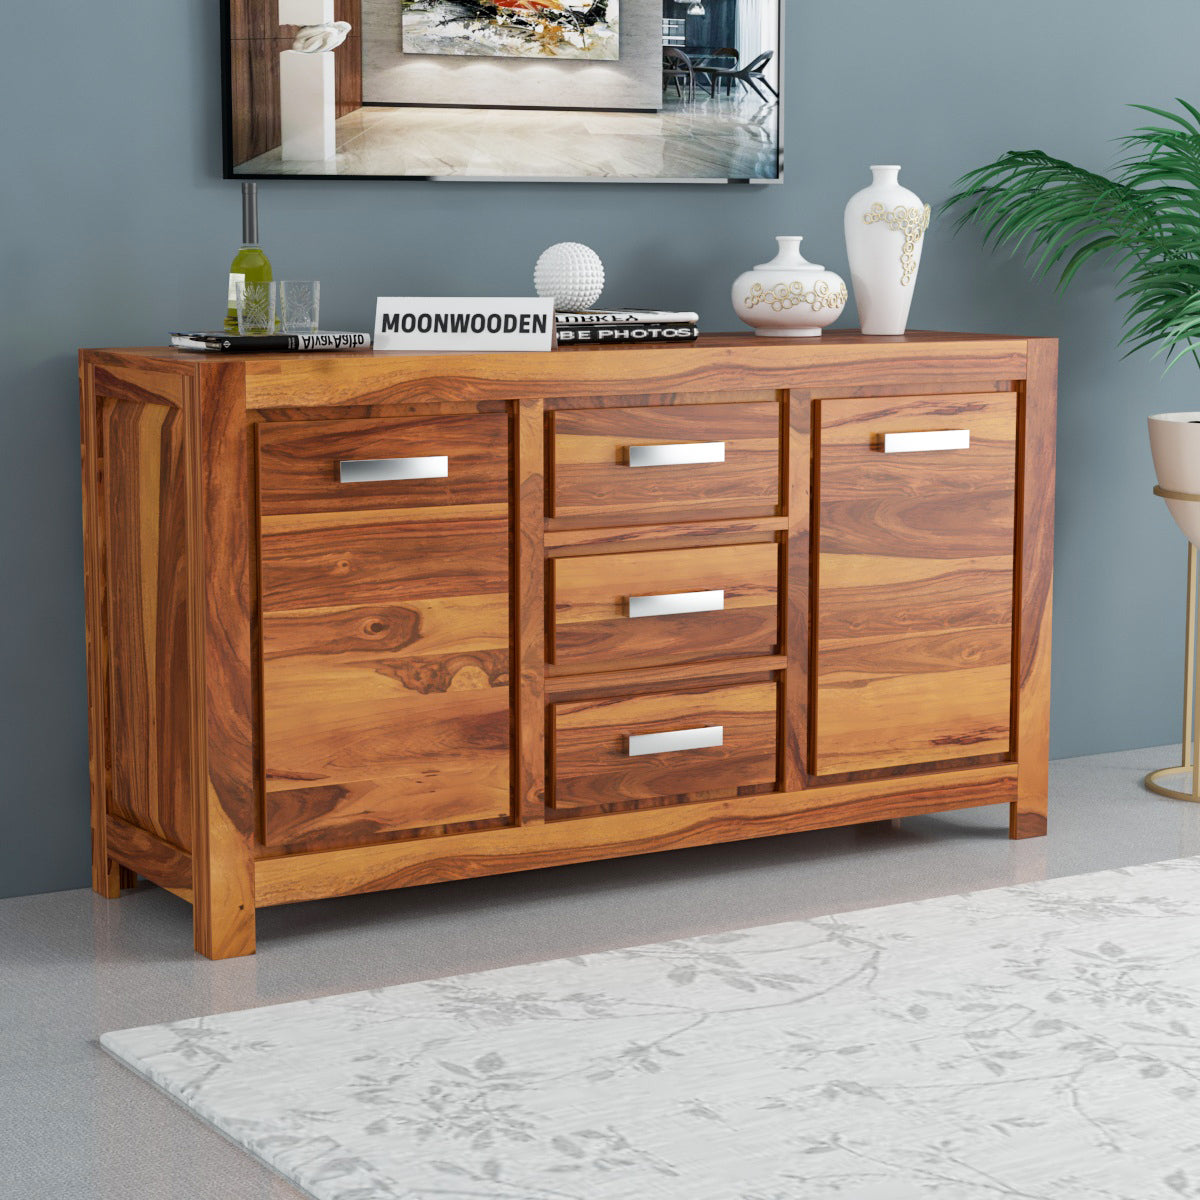 MoonWooden Sheesham Wood Sideboard Tv Cabinet for Living Room | Kitchen Storage Standing Movable Tv Unit Side Board Table with 3 Drawers, Door Cabinet & Shelf Storage Furniture for Home | Solid Wood